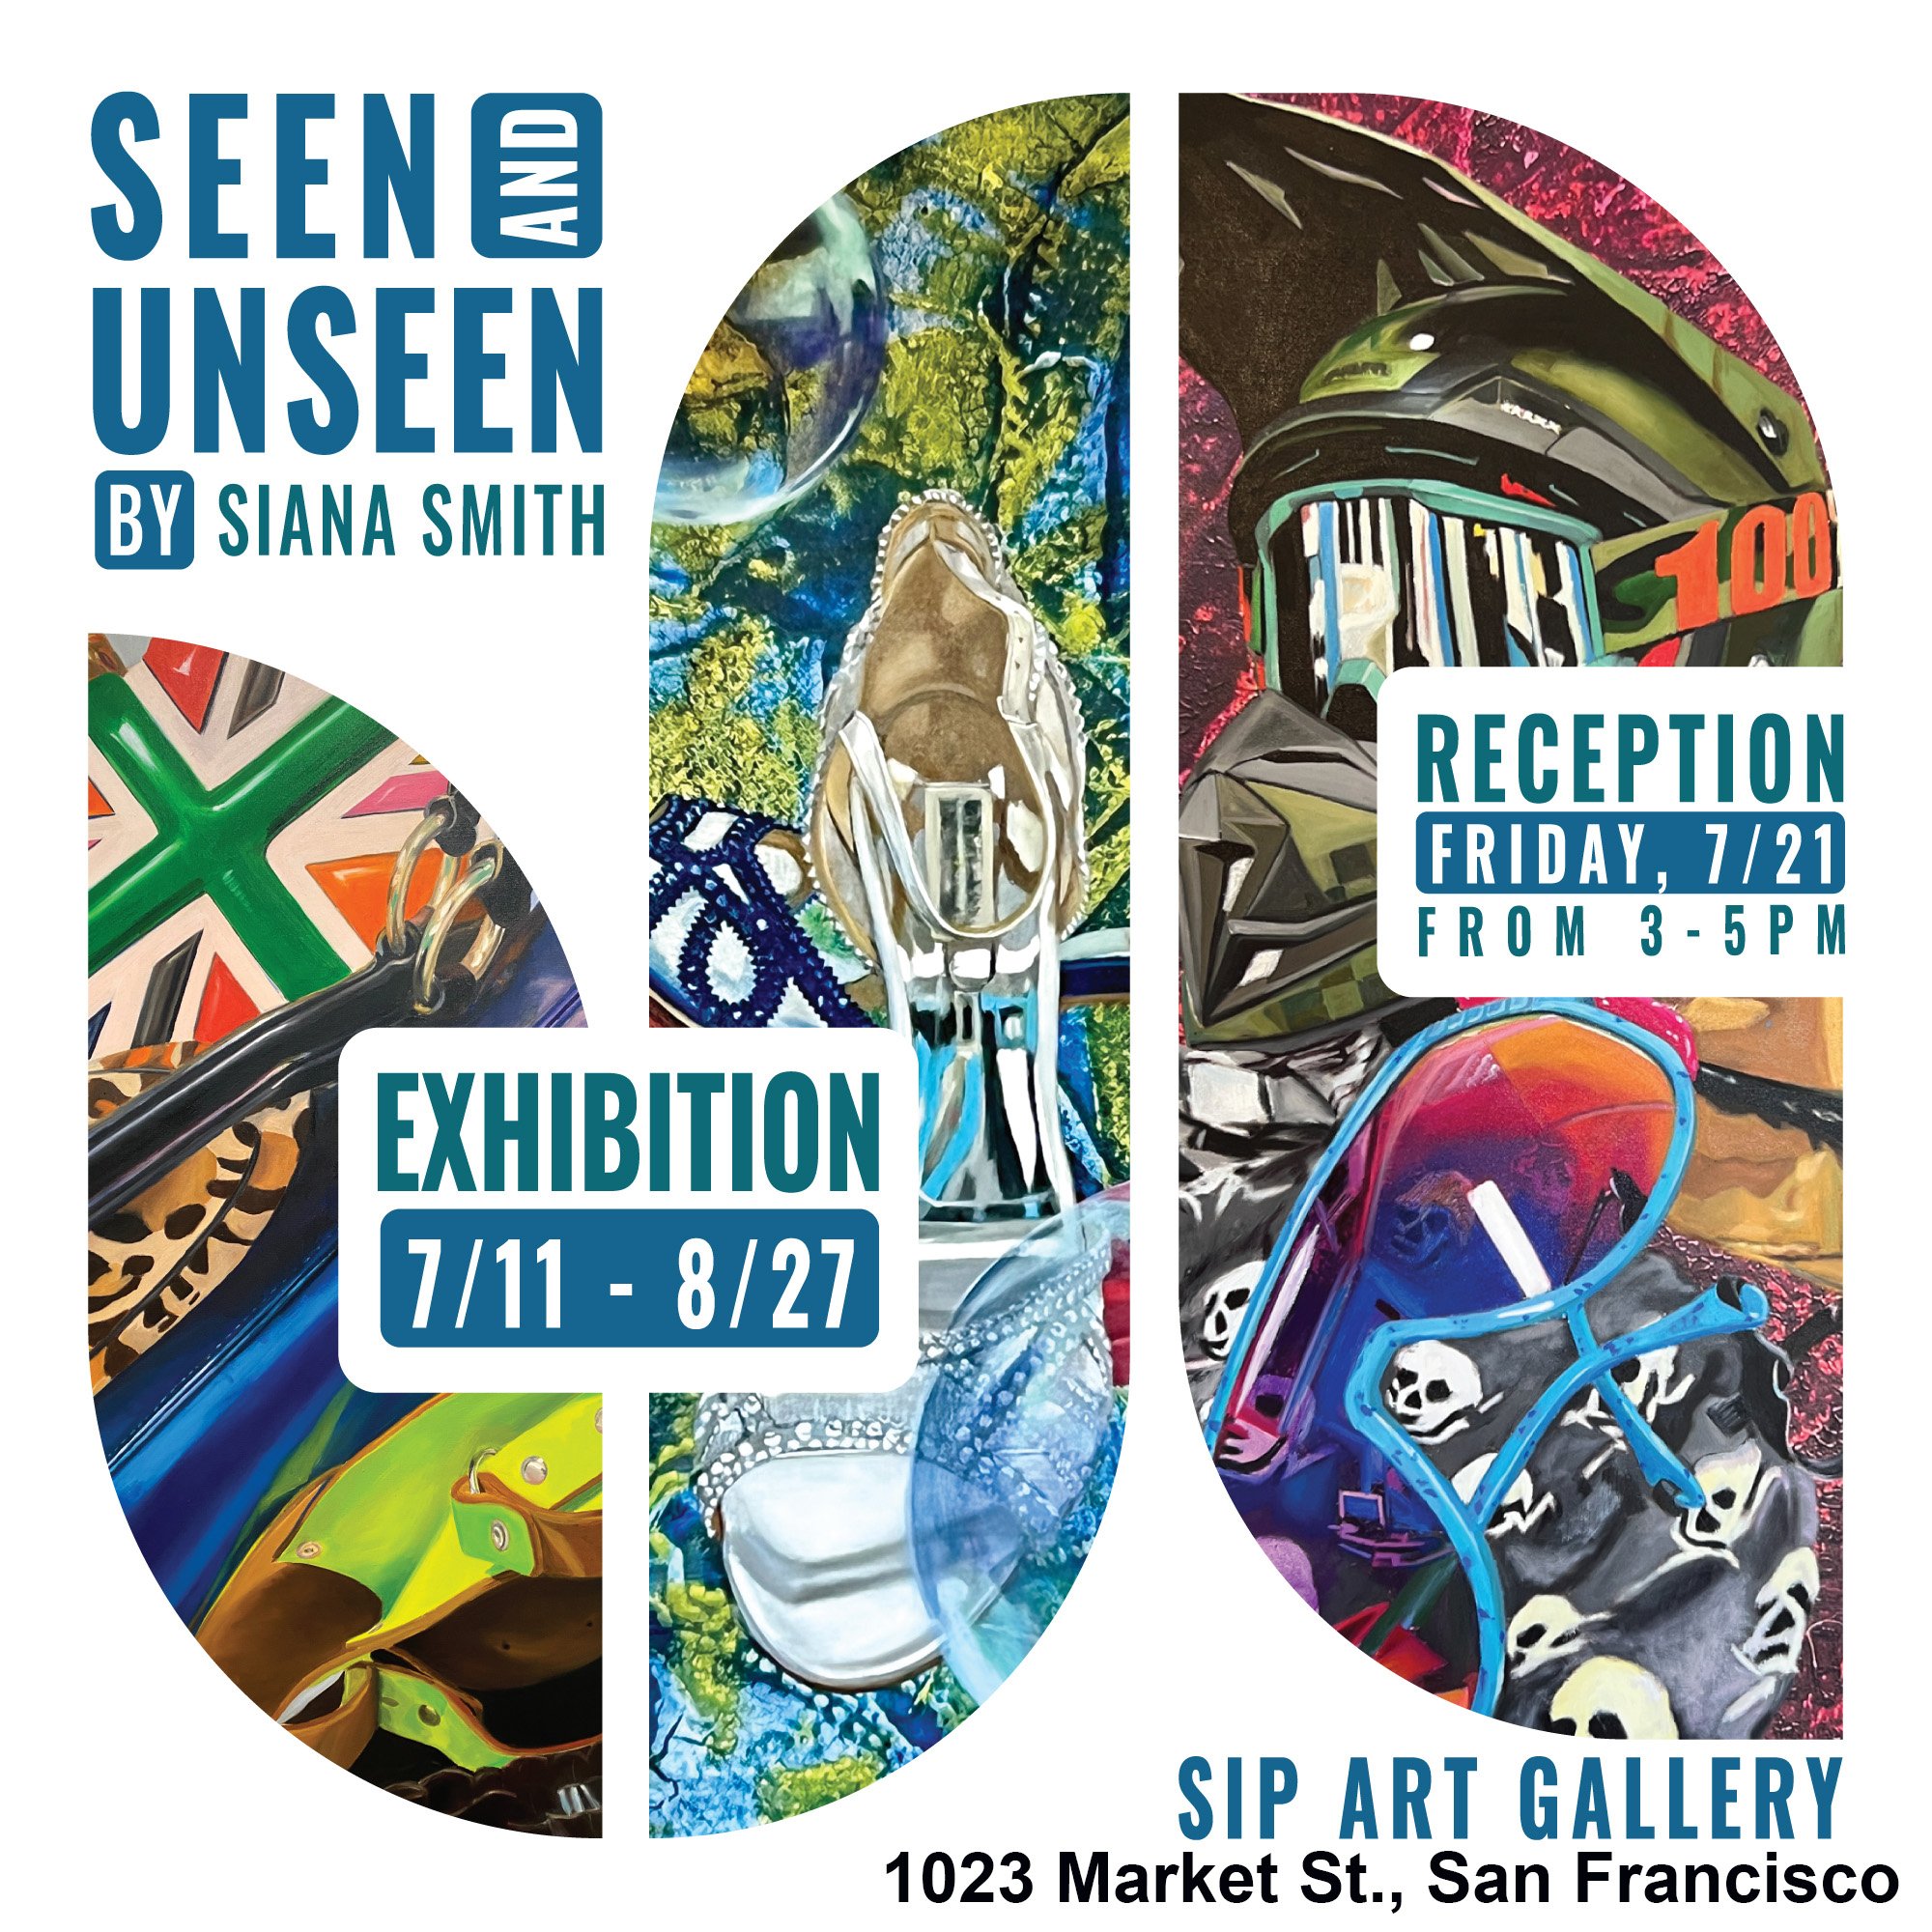 Solo Exhibition "Seen and Unseen"